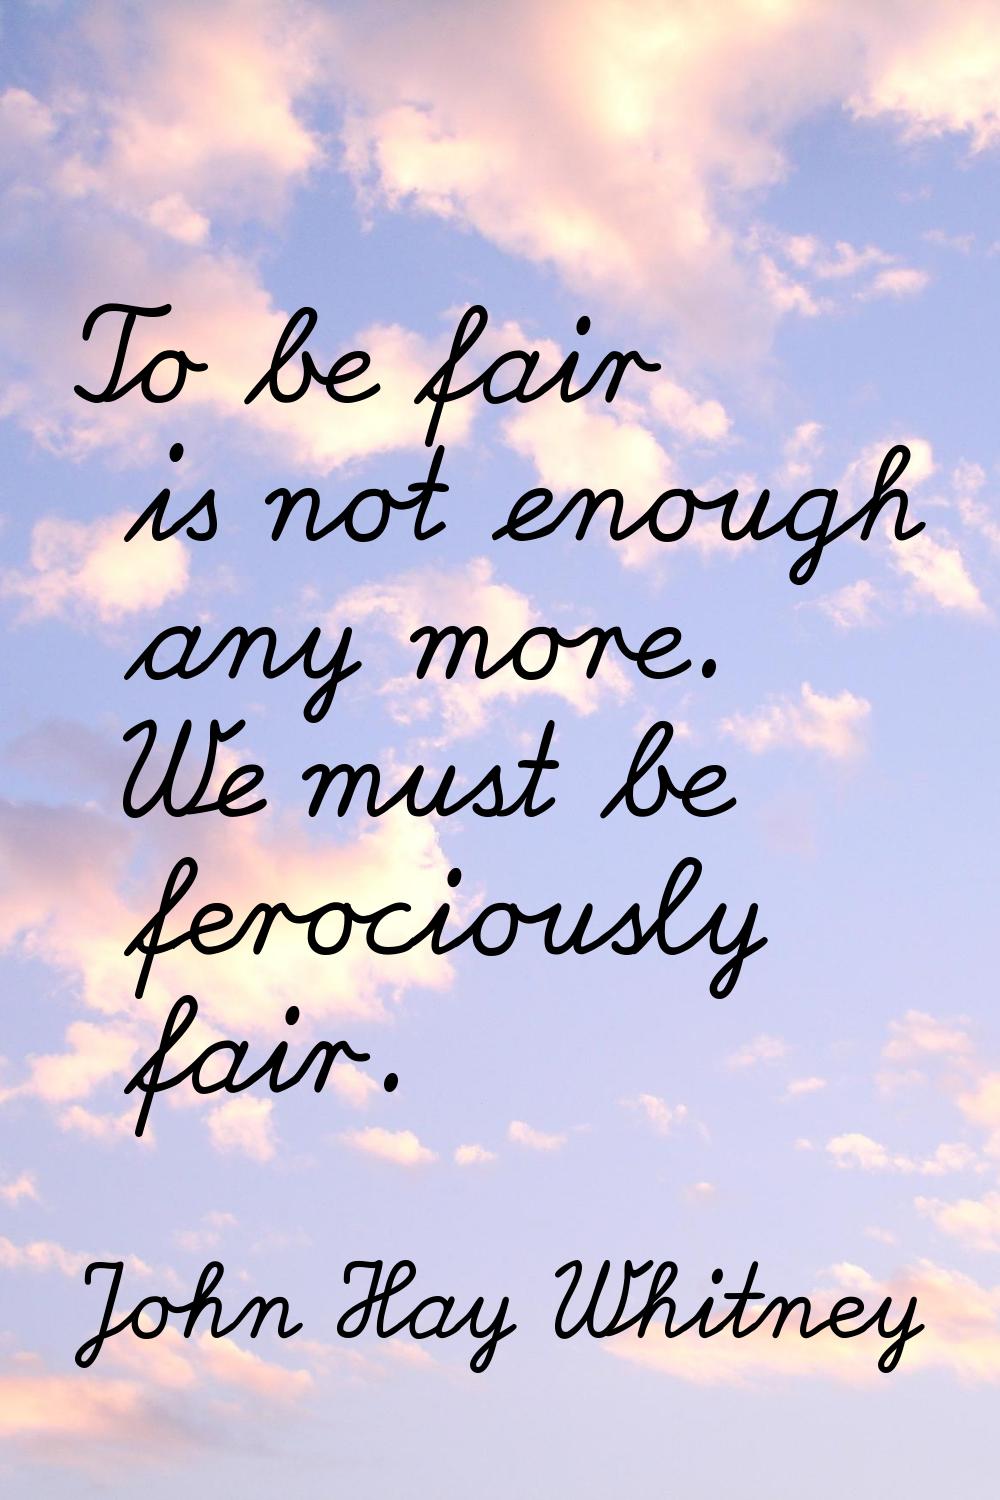 To be fair is not enough any more. We must be ferociously fair.